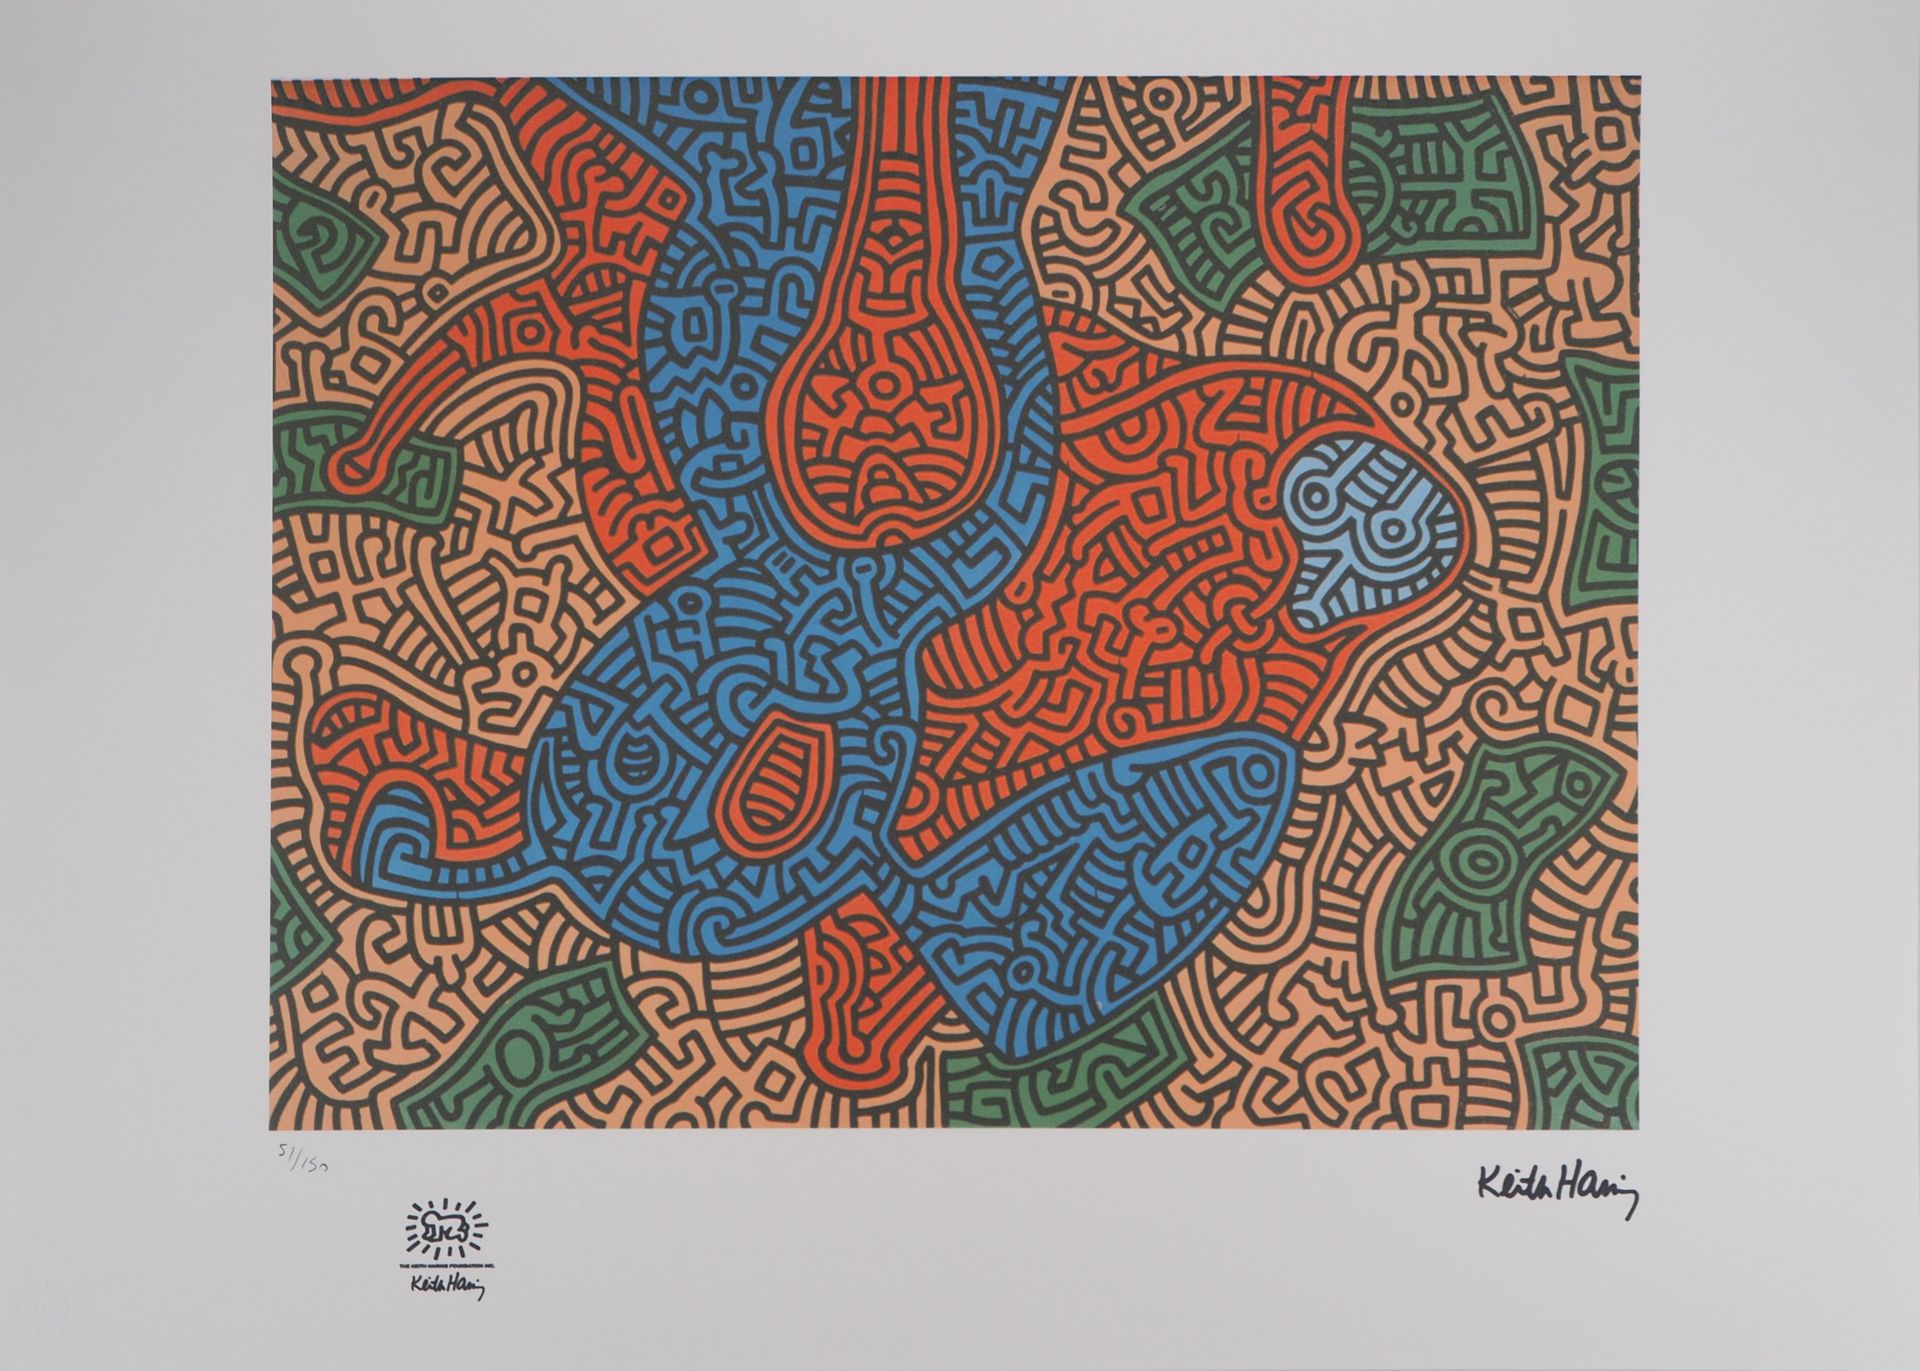 KEITH HARING Keith Haring (after)

Dollar race

Silkscreen on vellum

Signed in &hellip;